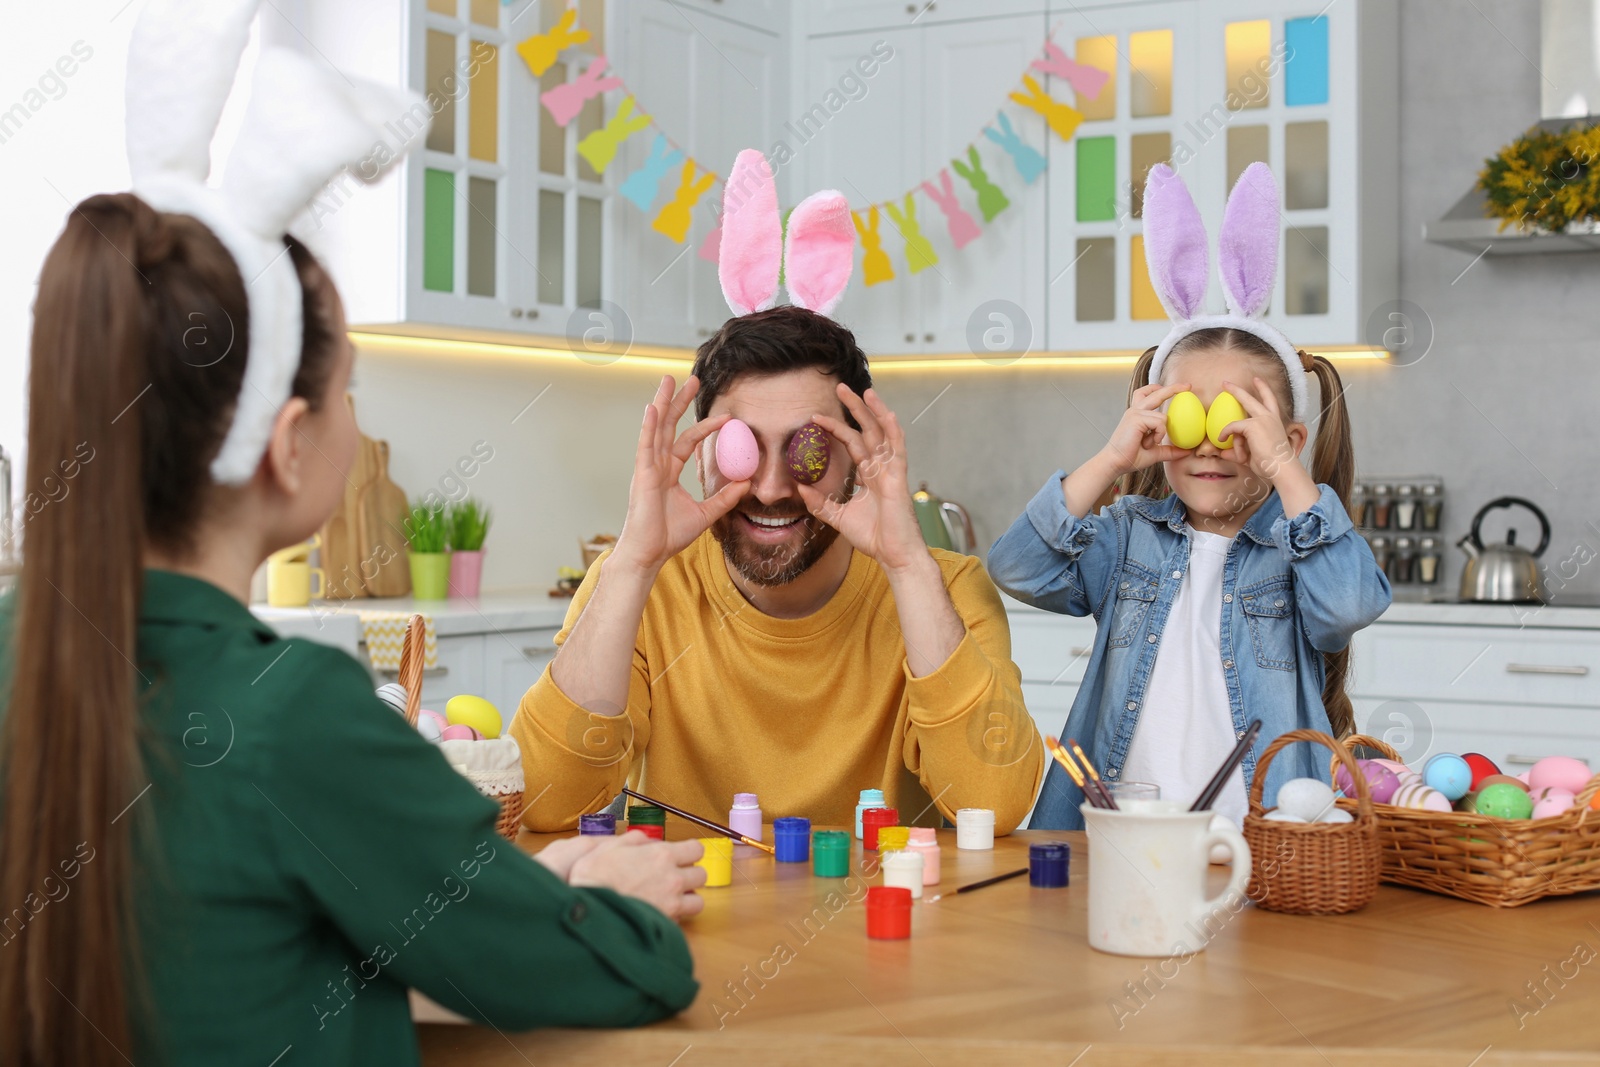 Photo of Father and daughter covering eyes with Easter eggs at table in kitchen. Family having fun